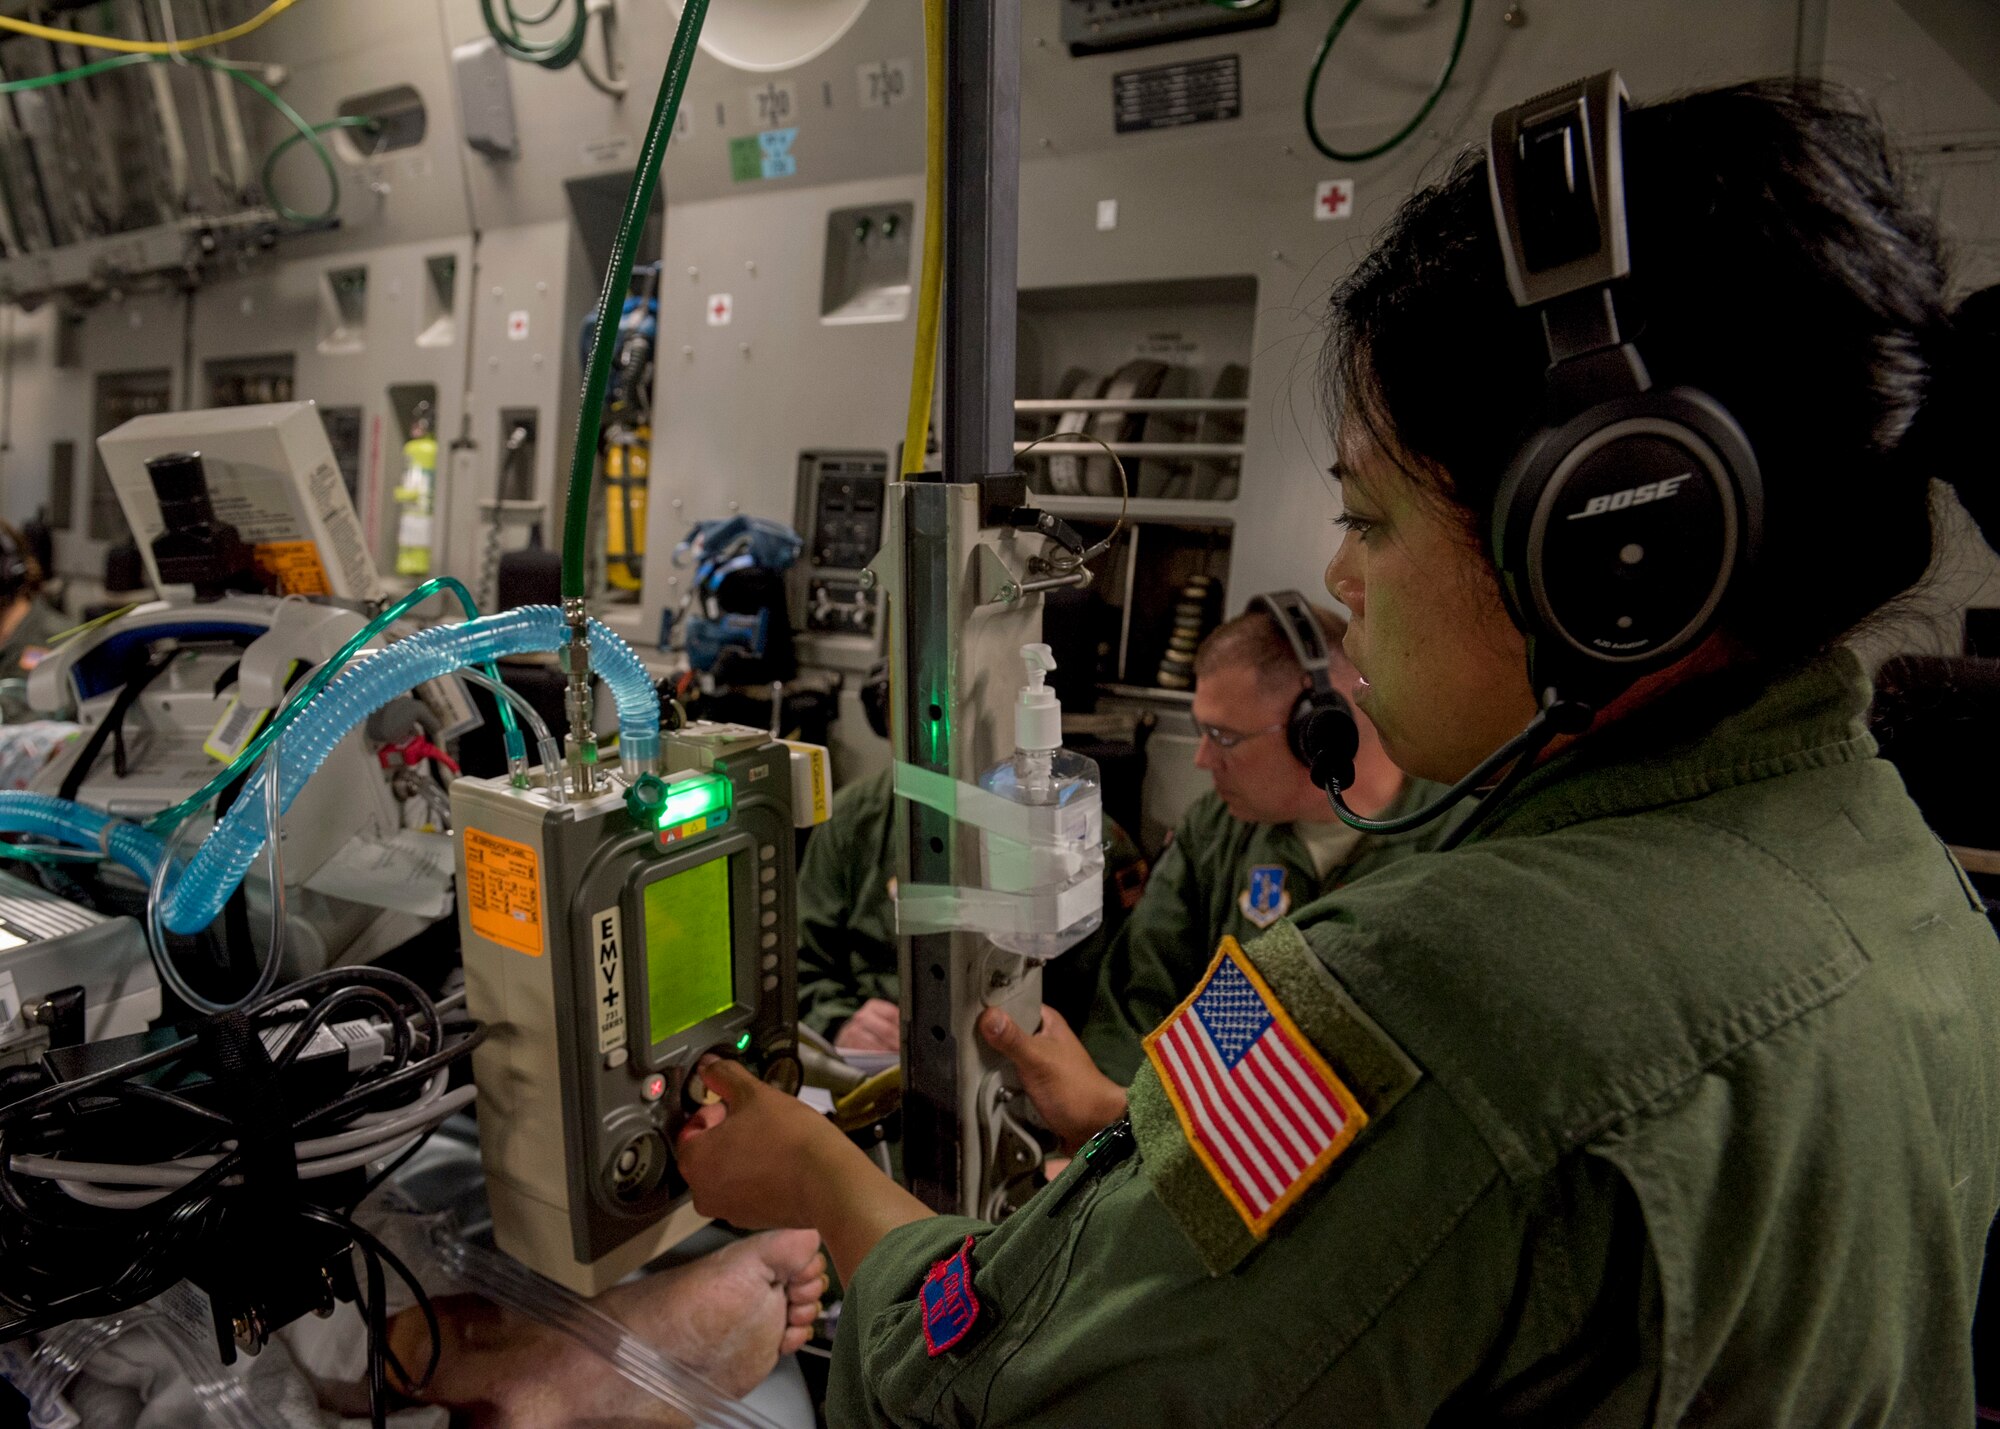 U.S. Air Force Master Sgt. Virginia Holmgren, a 124th Medical Group respiratory therapist with the Idaho Air National Guard, adjusts a patient’s ventilation levels on board a C-17 Globemaster III from Travis Air Force Base, Calif., after leaving Joint Base Pearl Harbor-Hickam, Hawaii, May 18, 2018. Holmgren was part of a critical care air transport team providing medical supervision of a patient back to Travis. (U.S. Air Force photo by Lan Kim)